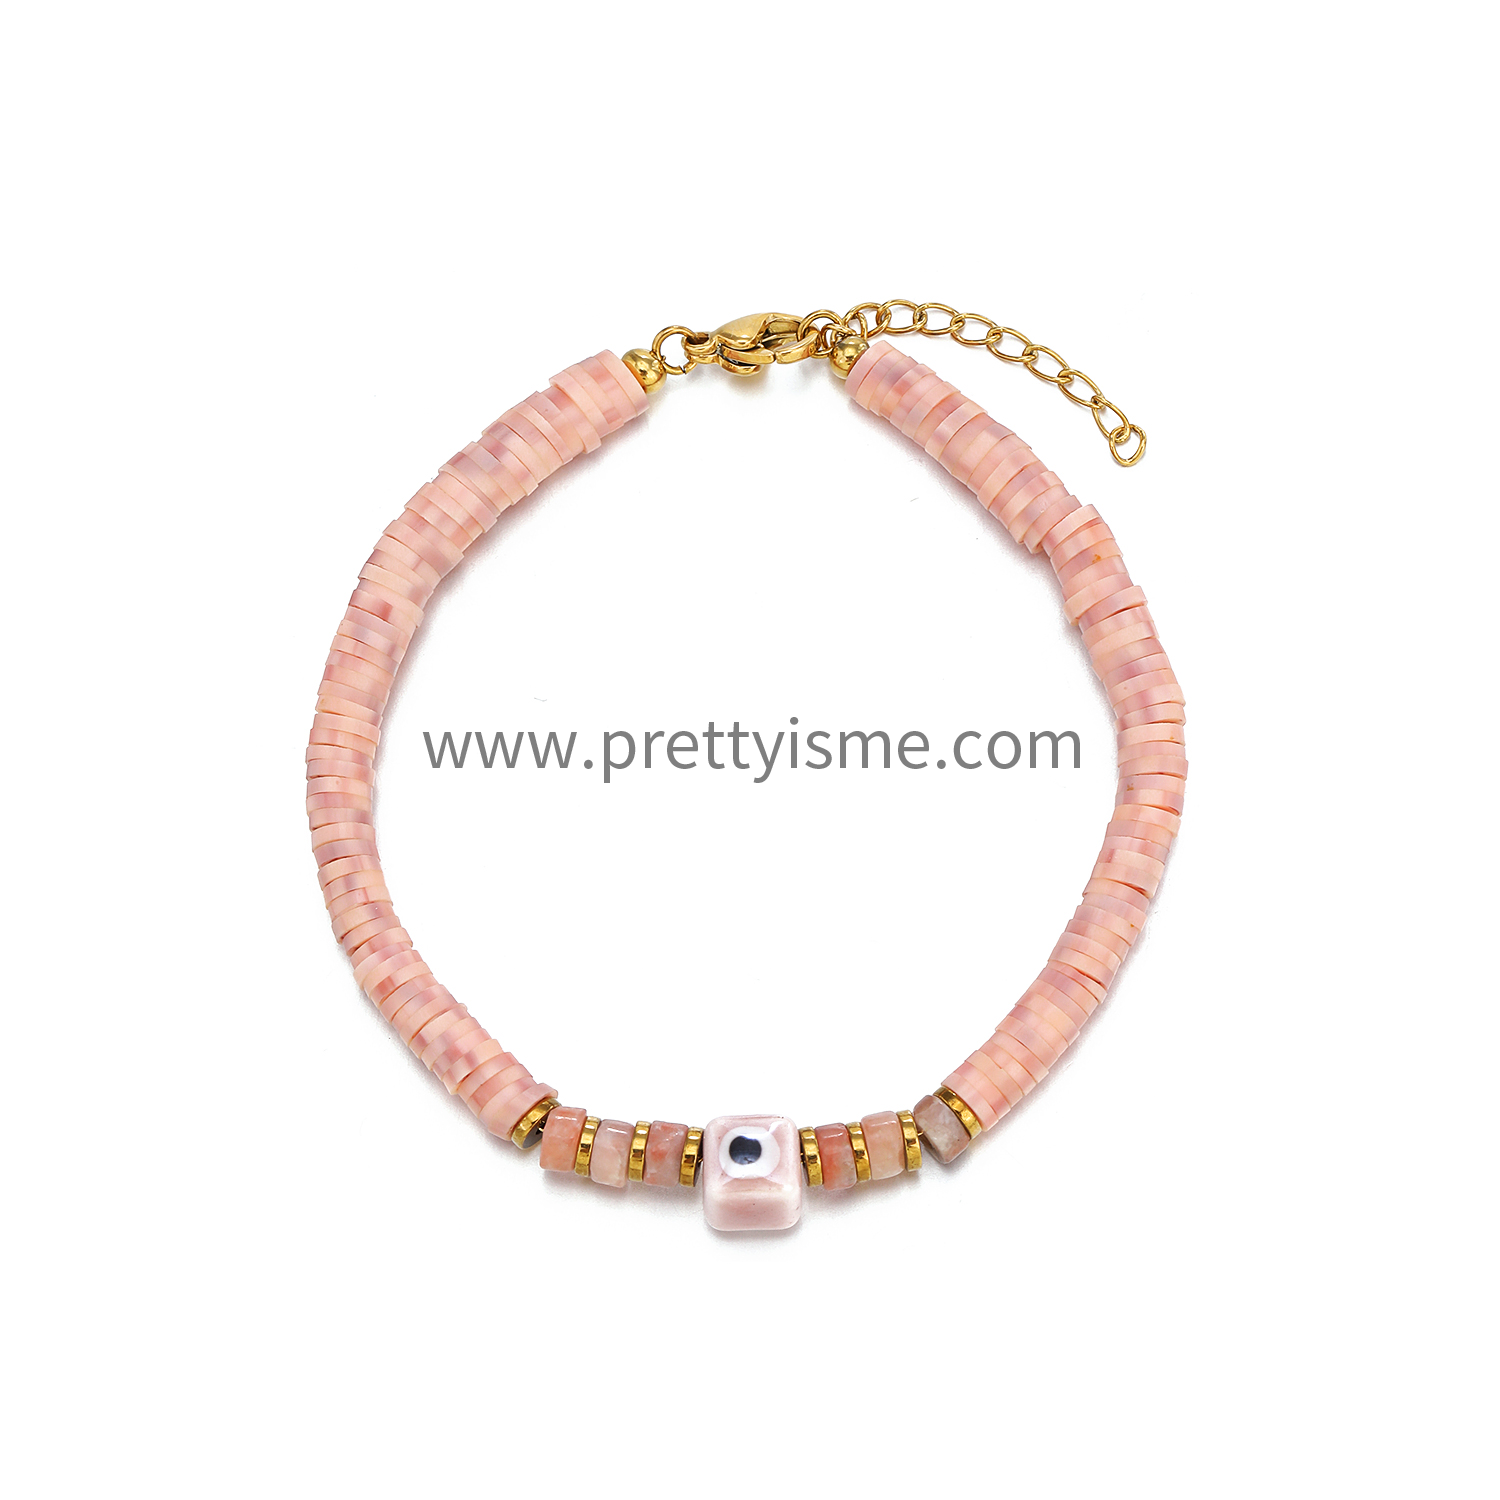 Pretty Is Me Collection 18K Gold Plated 316L Stainless Steel Stone Beads Pink Polymer Clay Ceramics Eye Charm Bracelet Women (8).webp